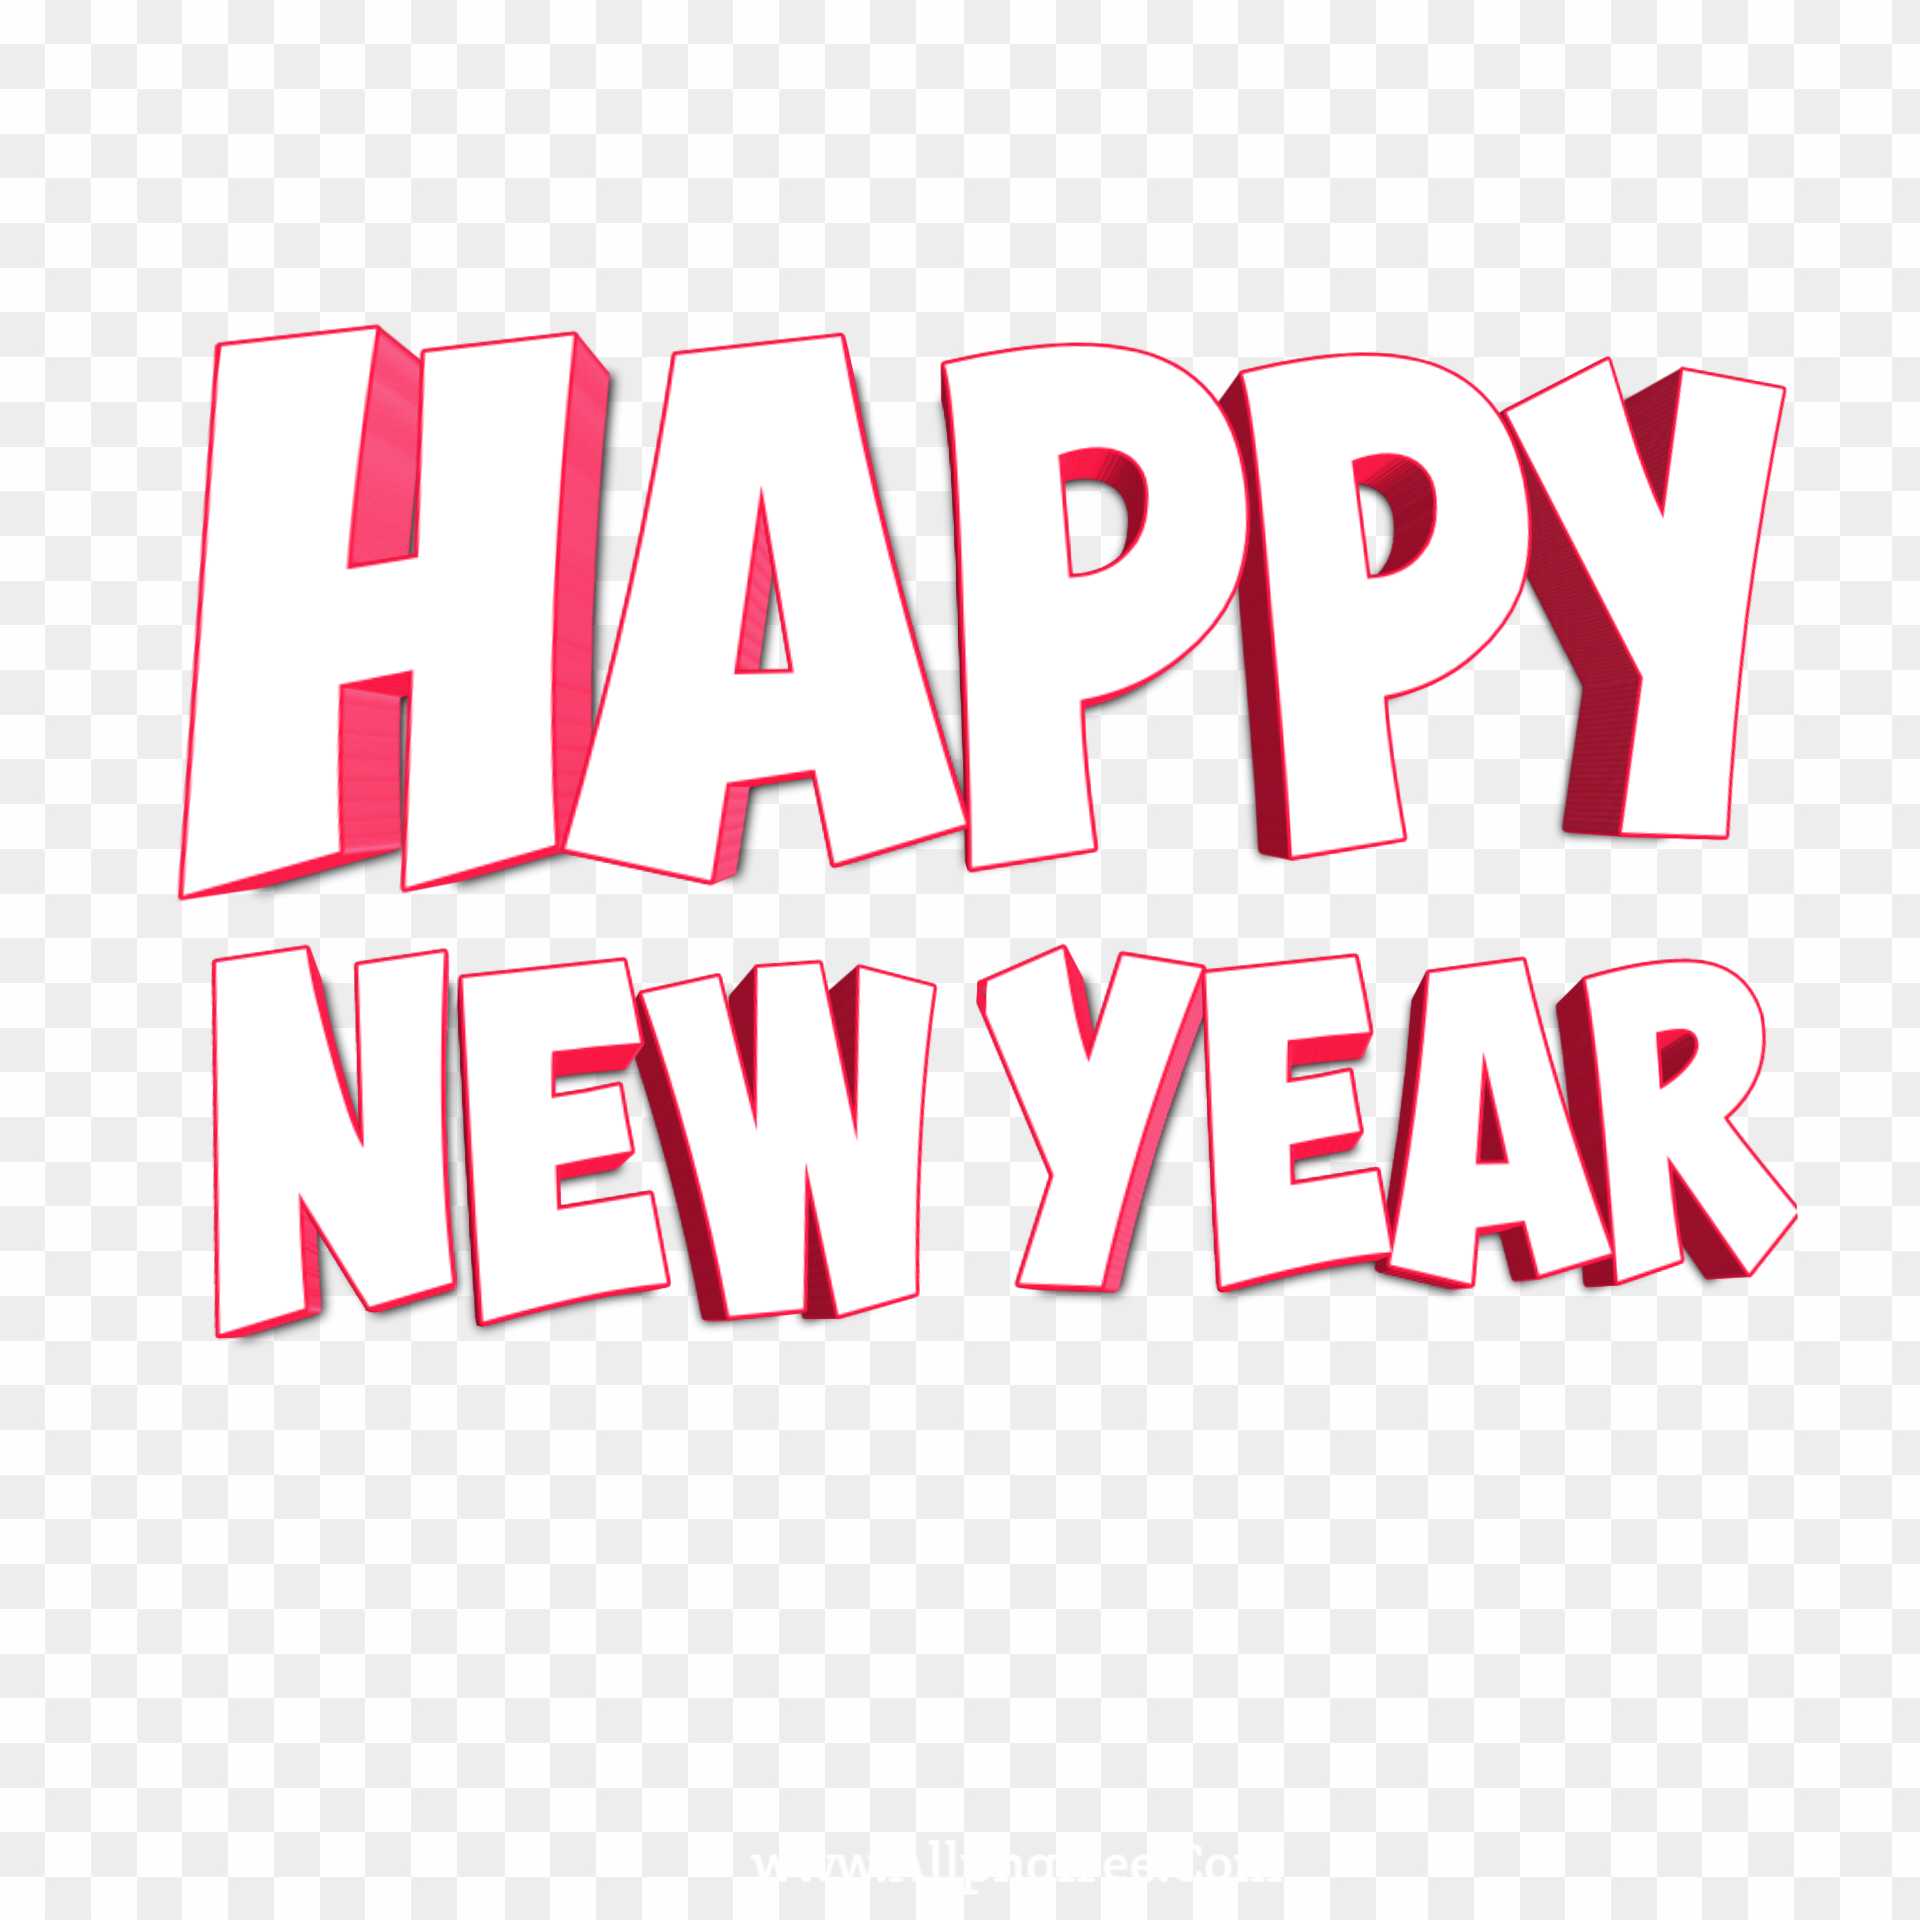 Happy New year hd Png images download 